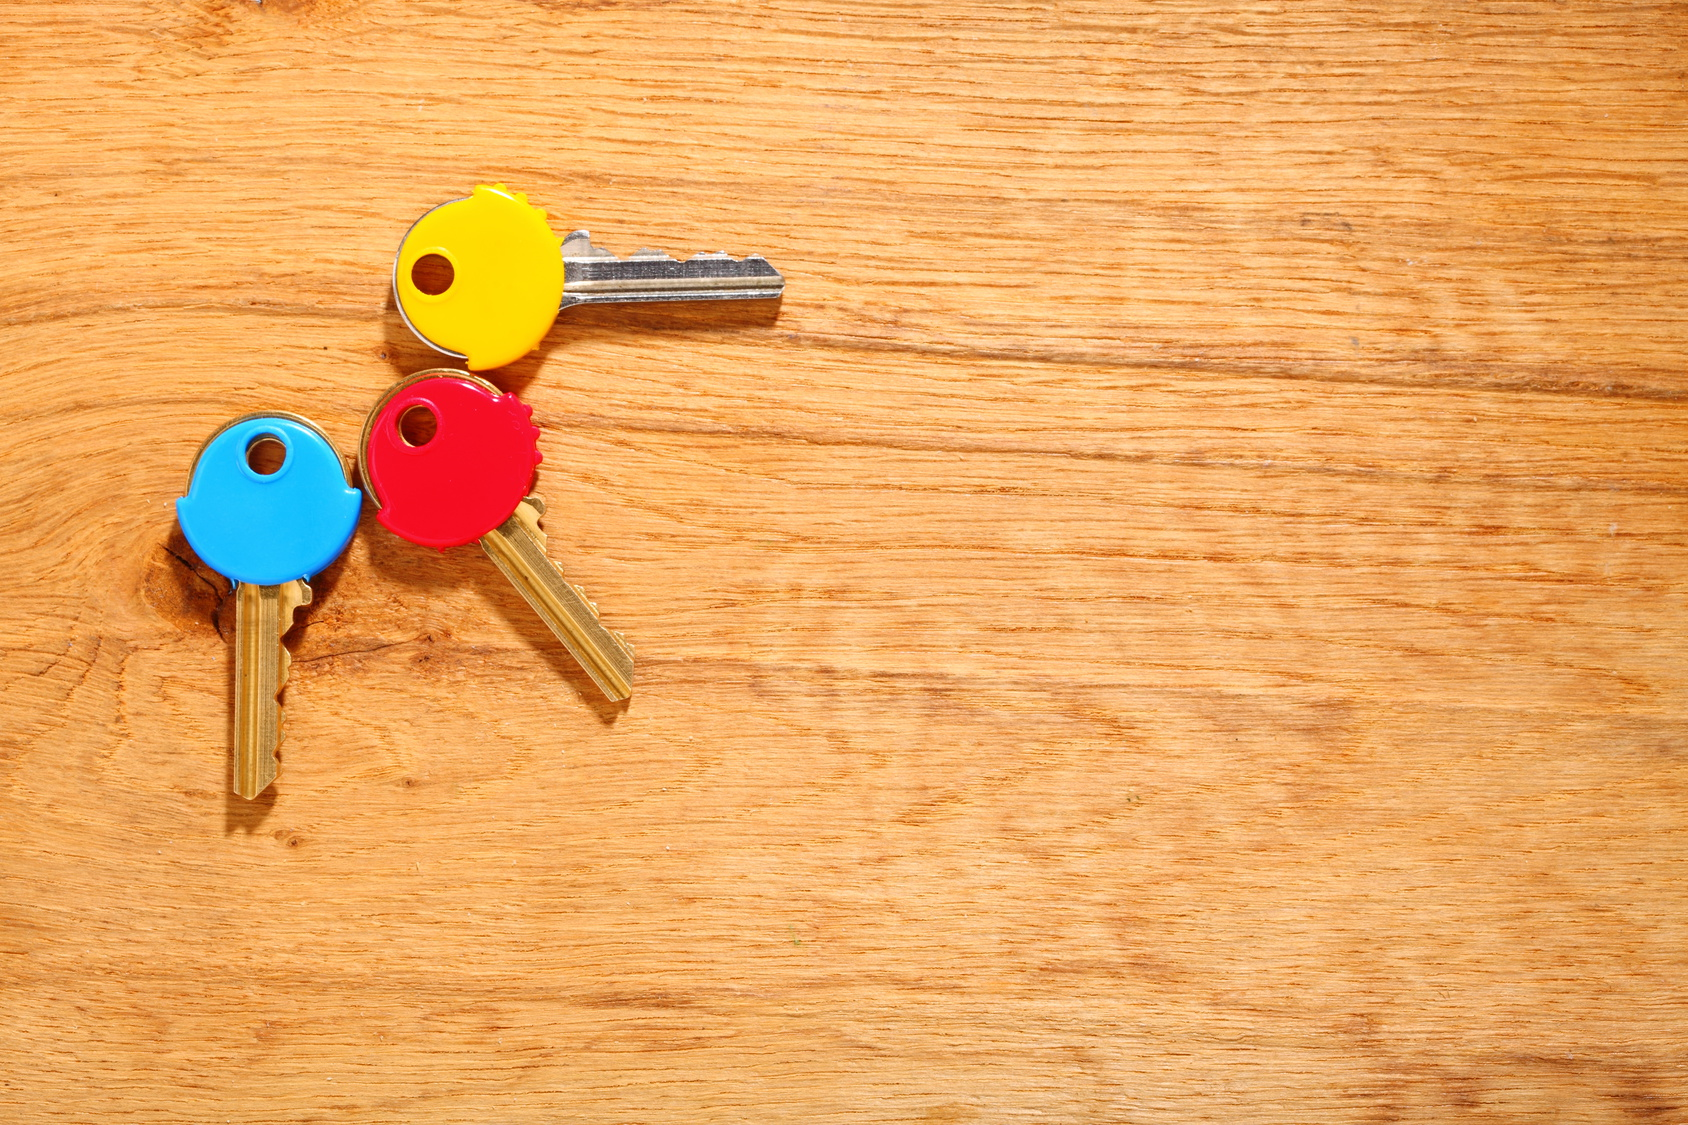 7 Things No One Told You About Becoming a Homeowner